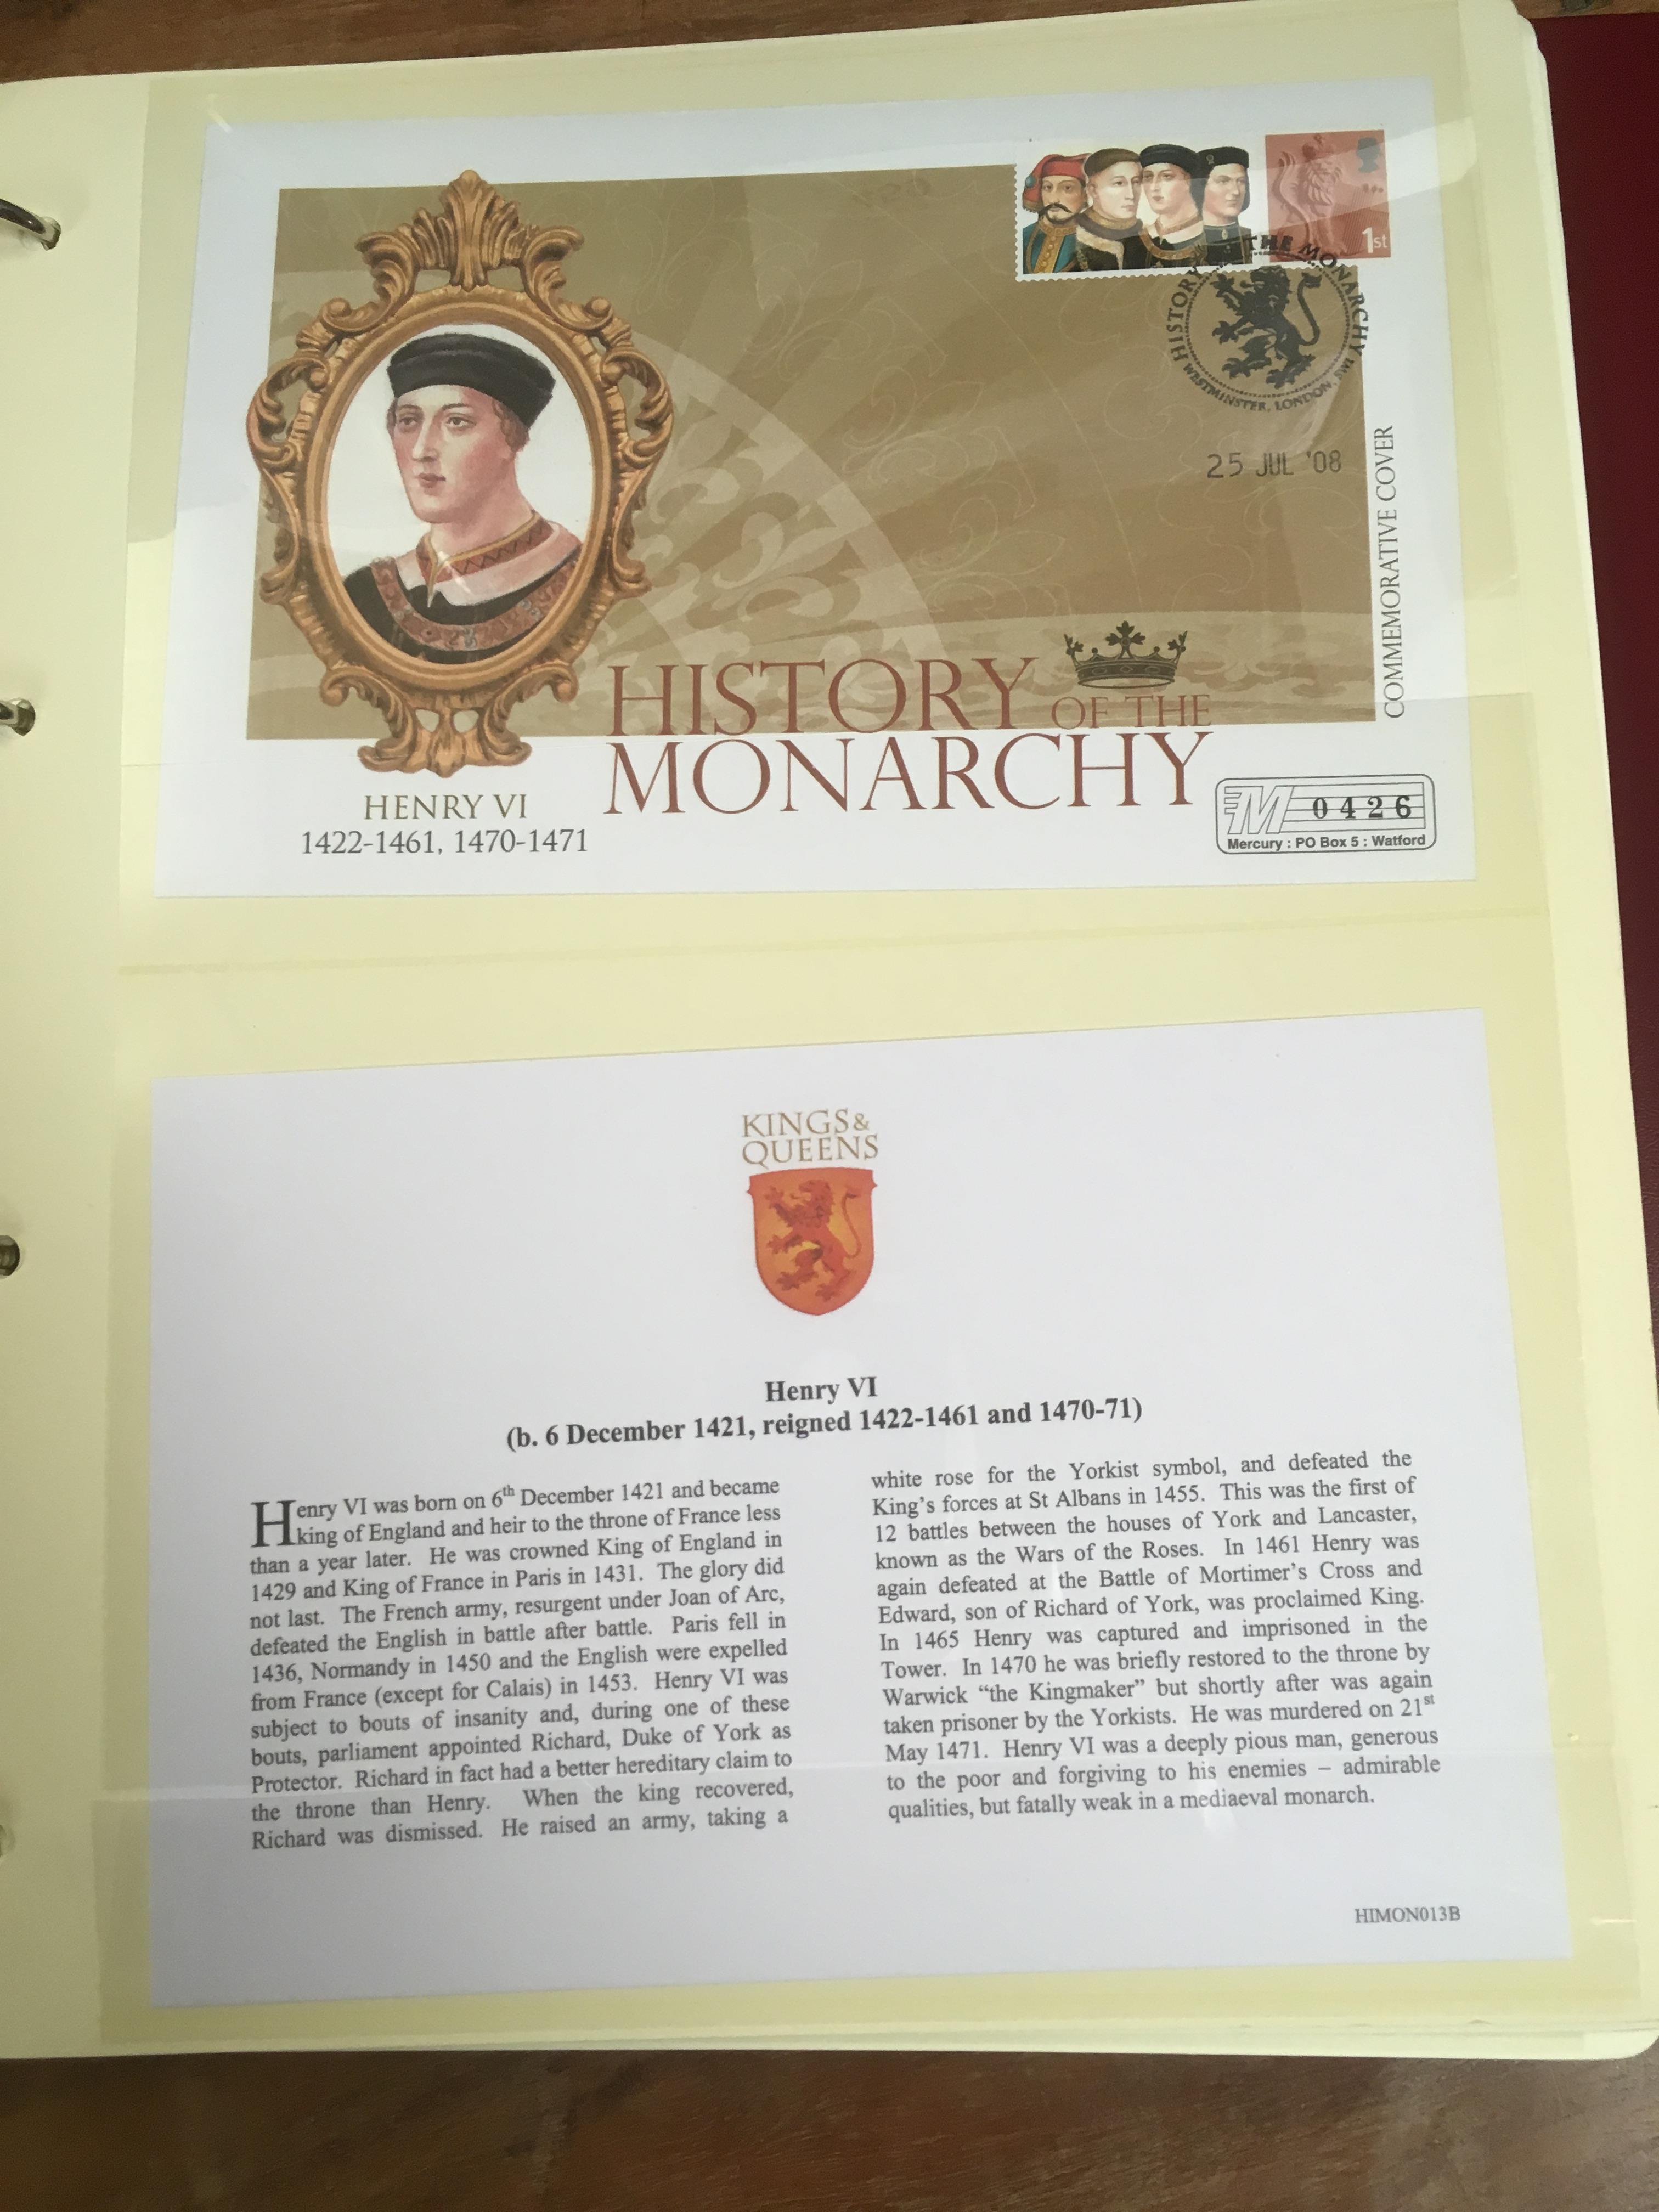 HISTORY OF THE MONARCHY STAMP, COVER COLLECTION IN EIGHT WESTMINSTER ALBUMS, - Image 4 of 4